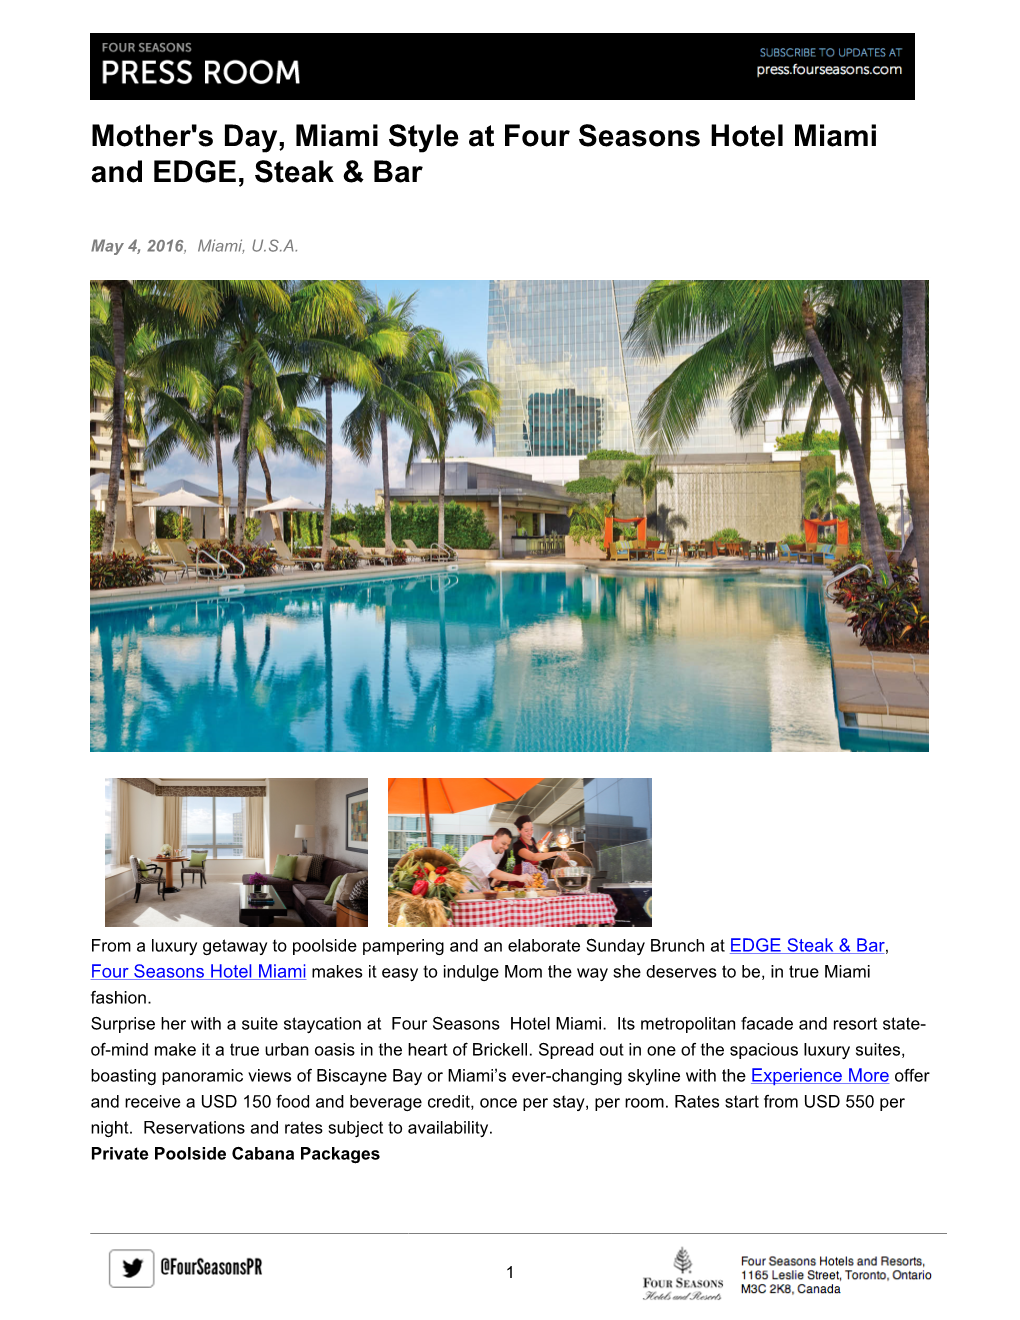 Mother's Day, Miami Style at Four Seasons Hotel Miami and EDGE, Steak & Bar